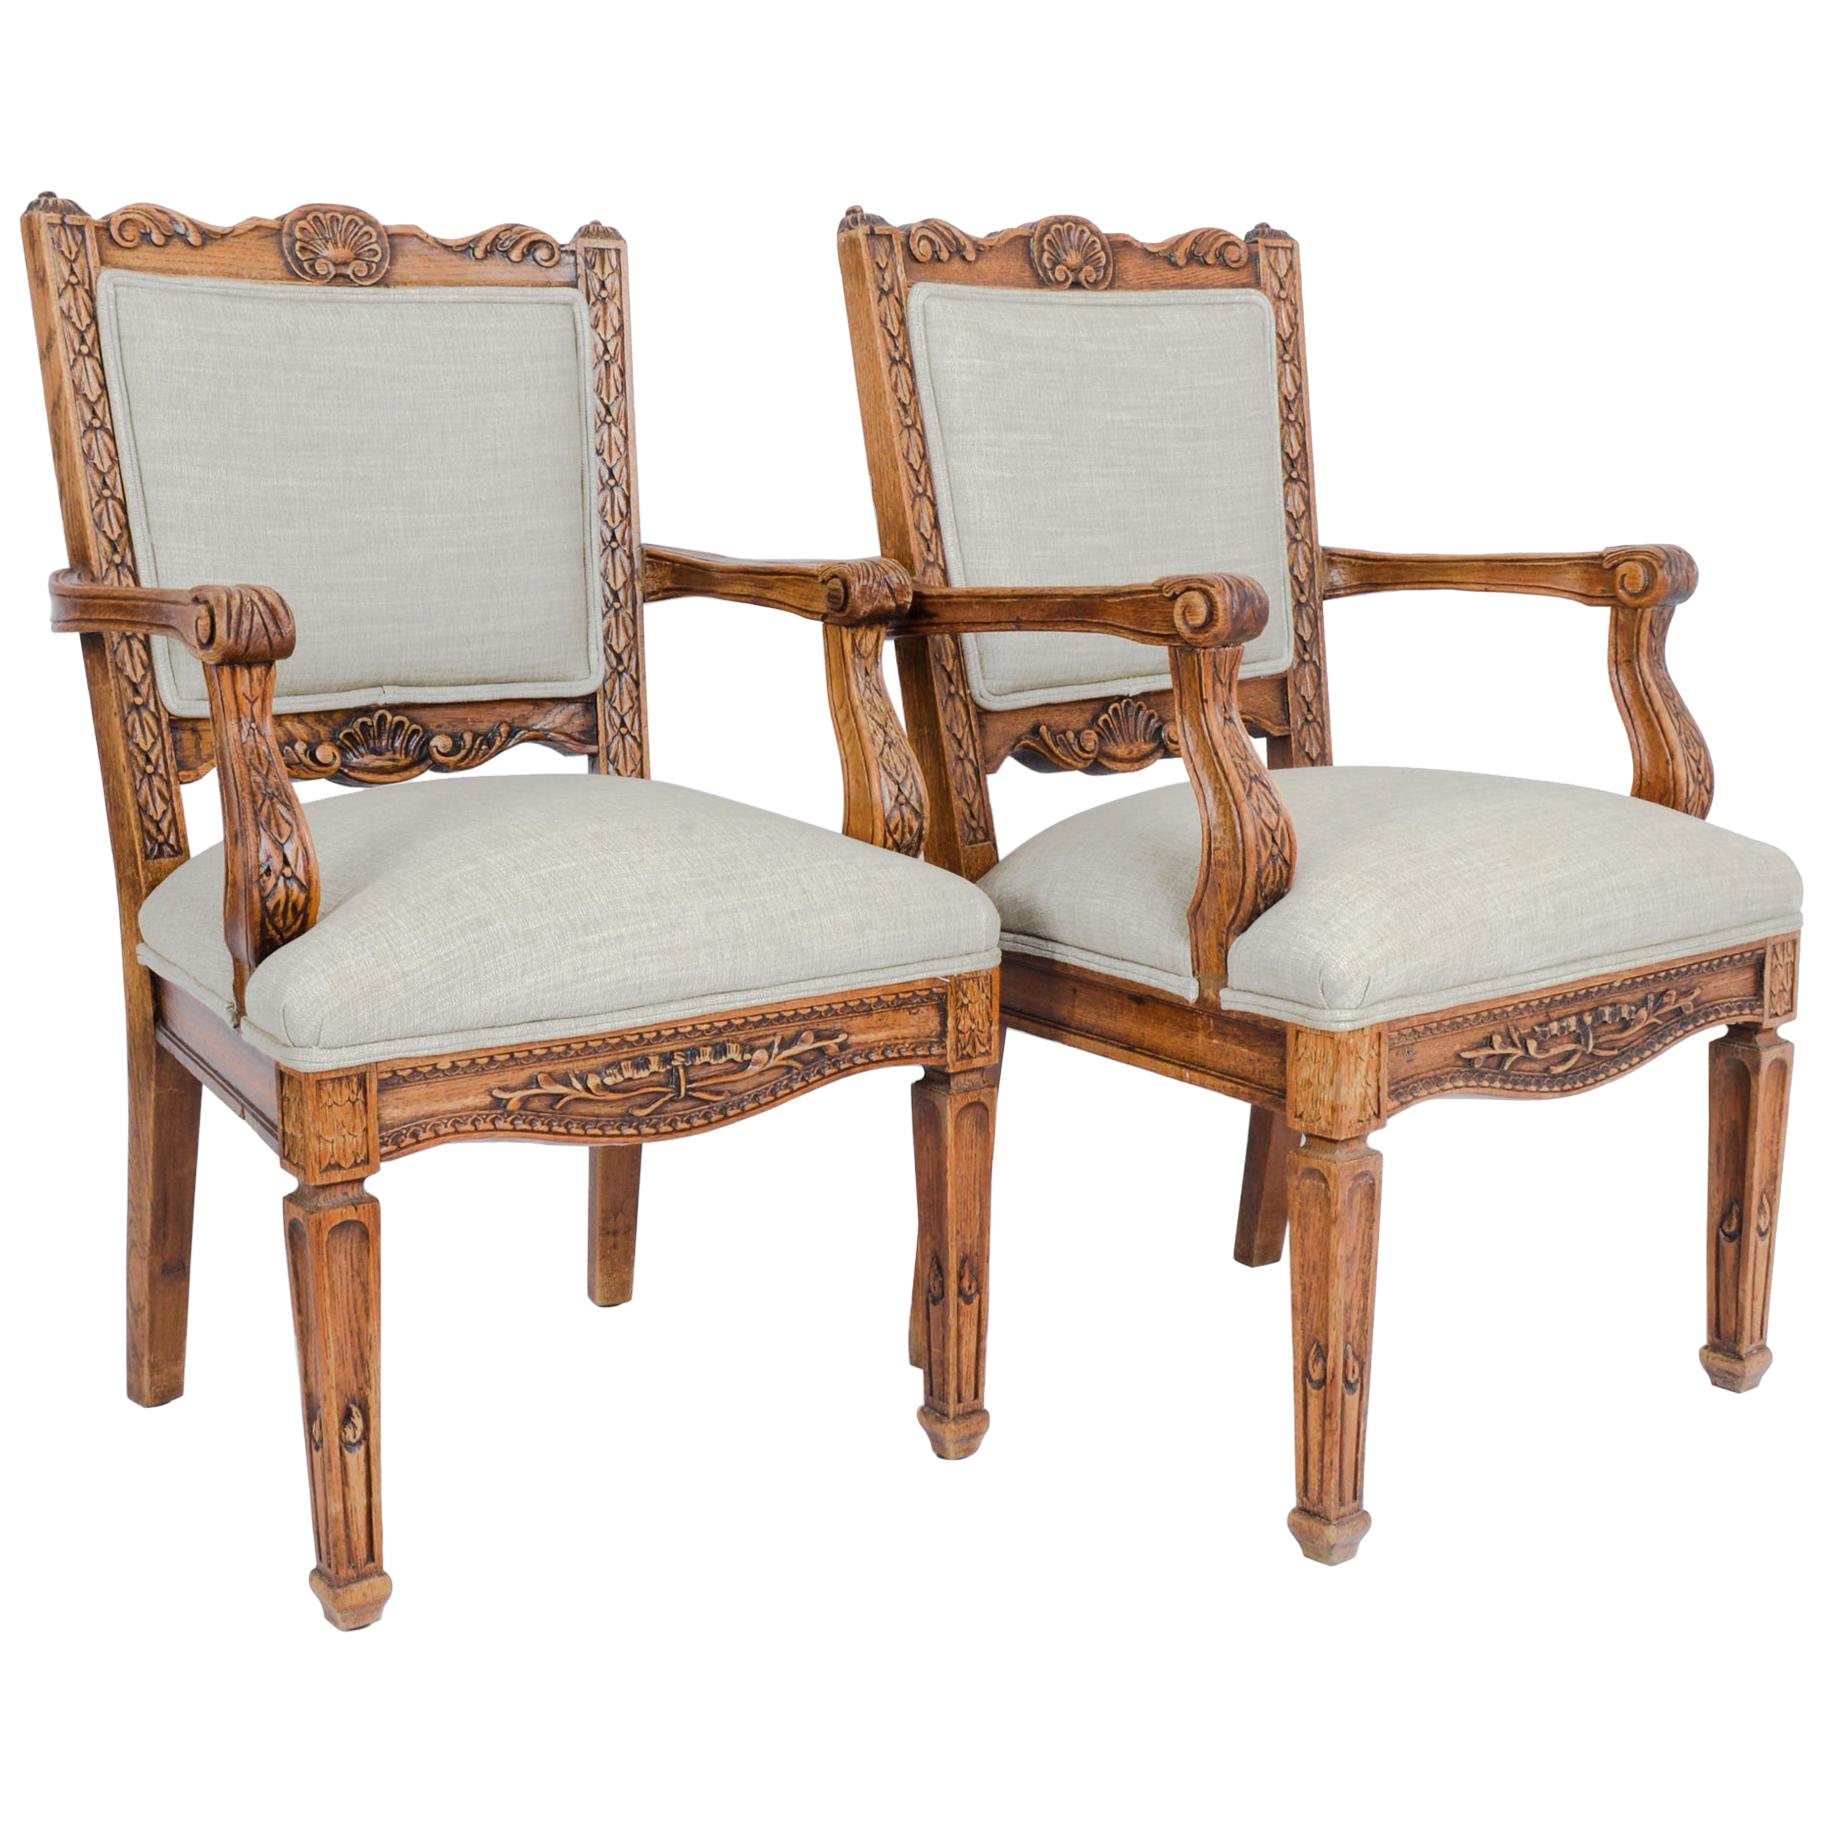 1910s Belgian Oak Carved Upholstered Armchairs, a Pair